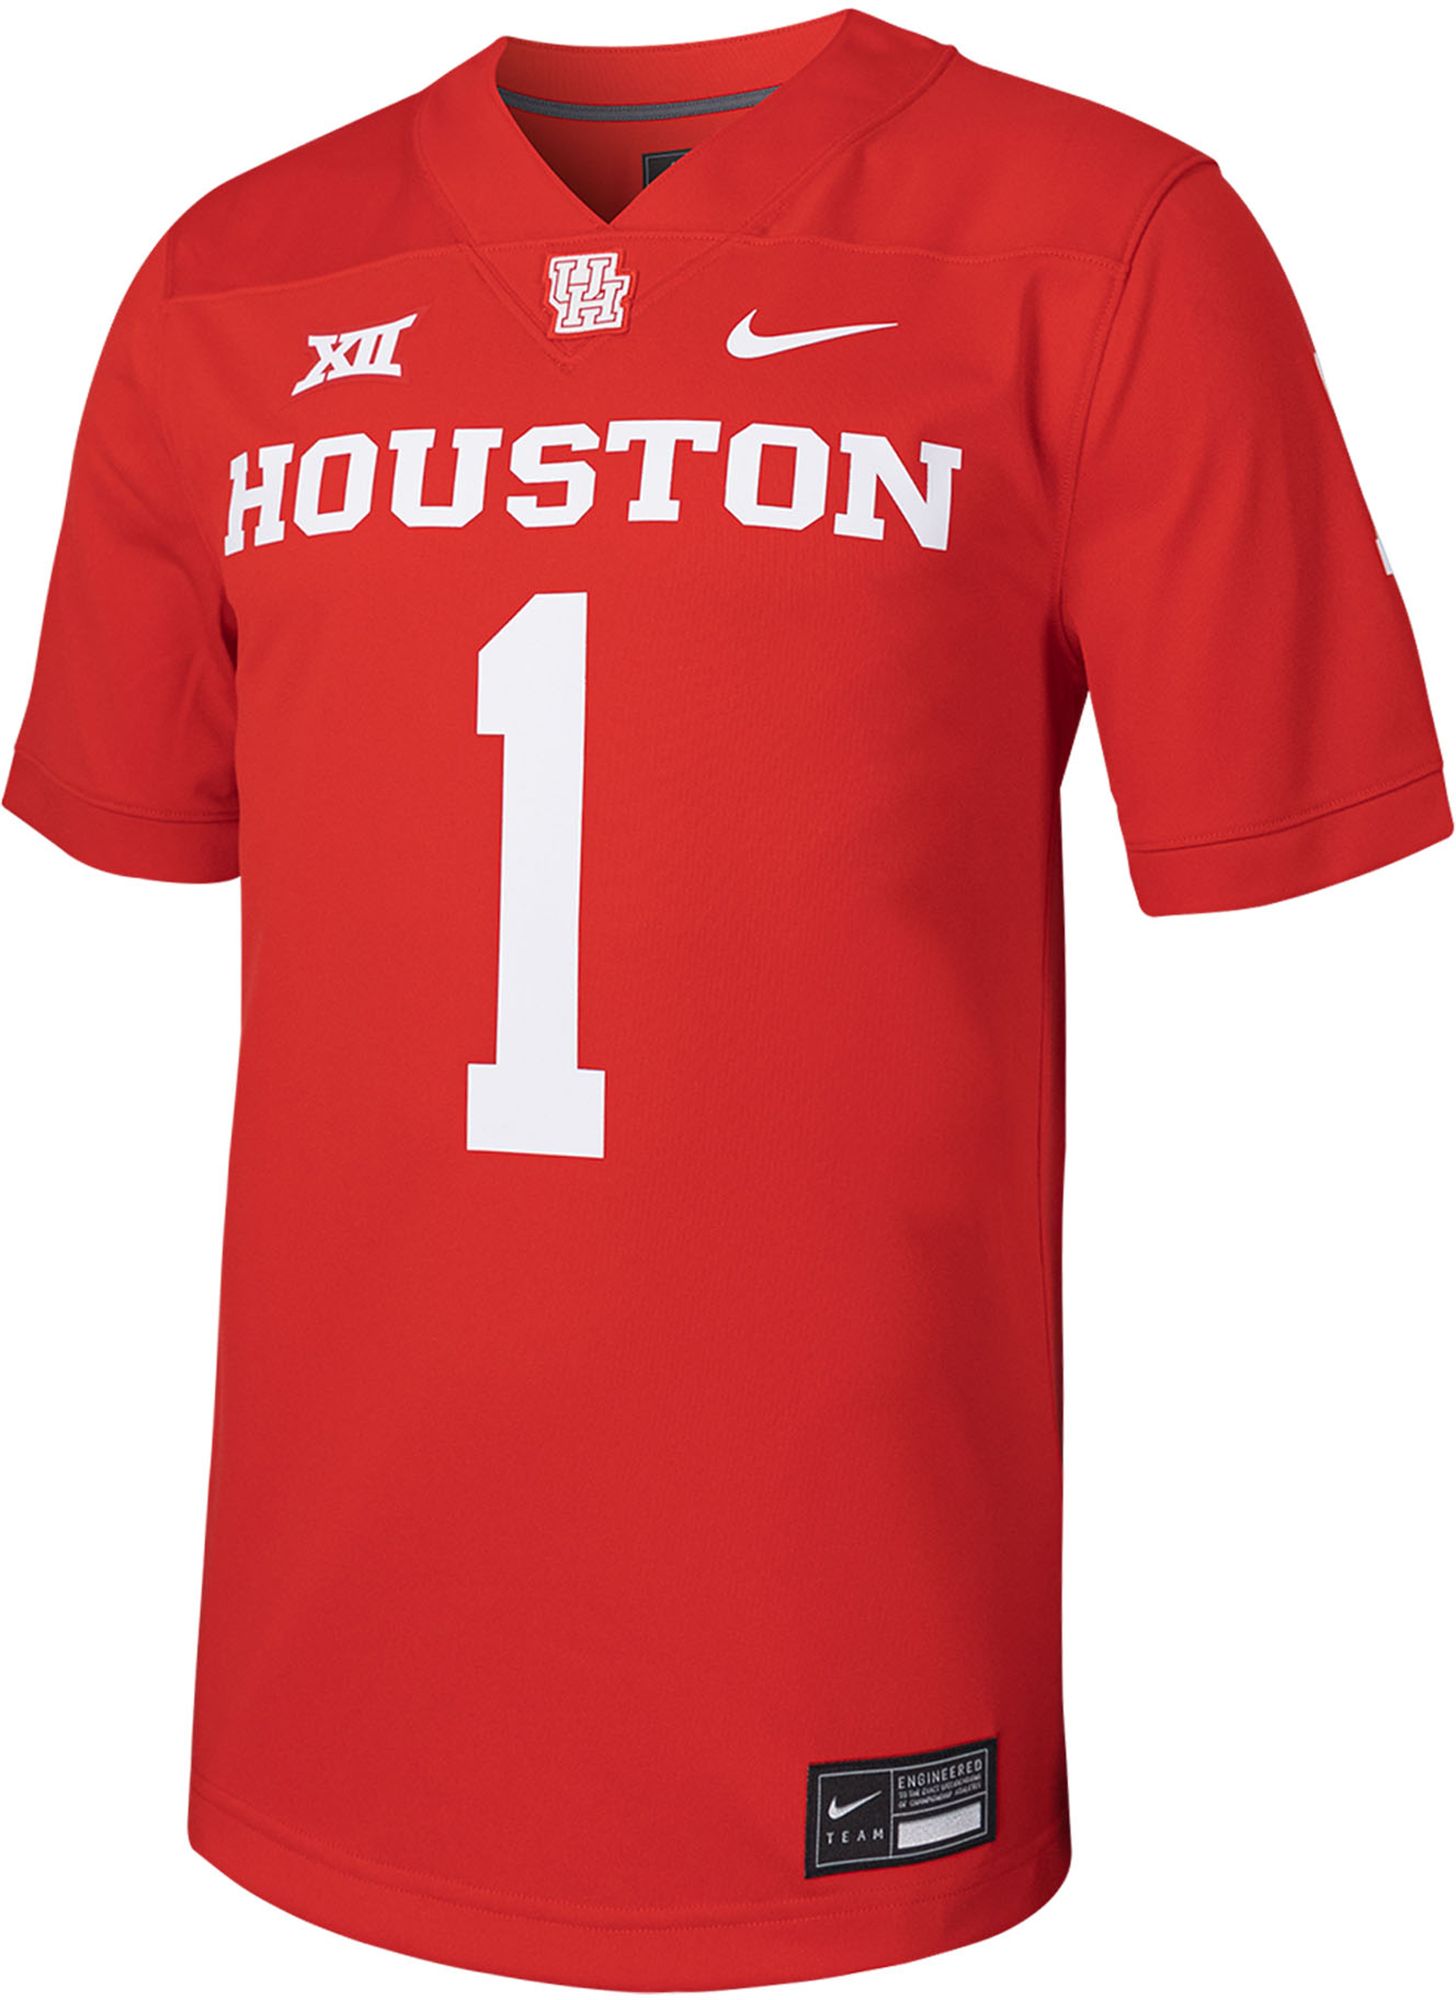 Houston Cougars cross country legends jersey